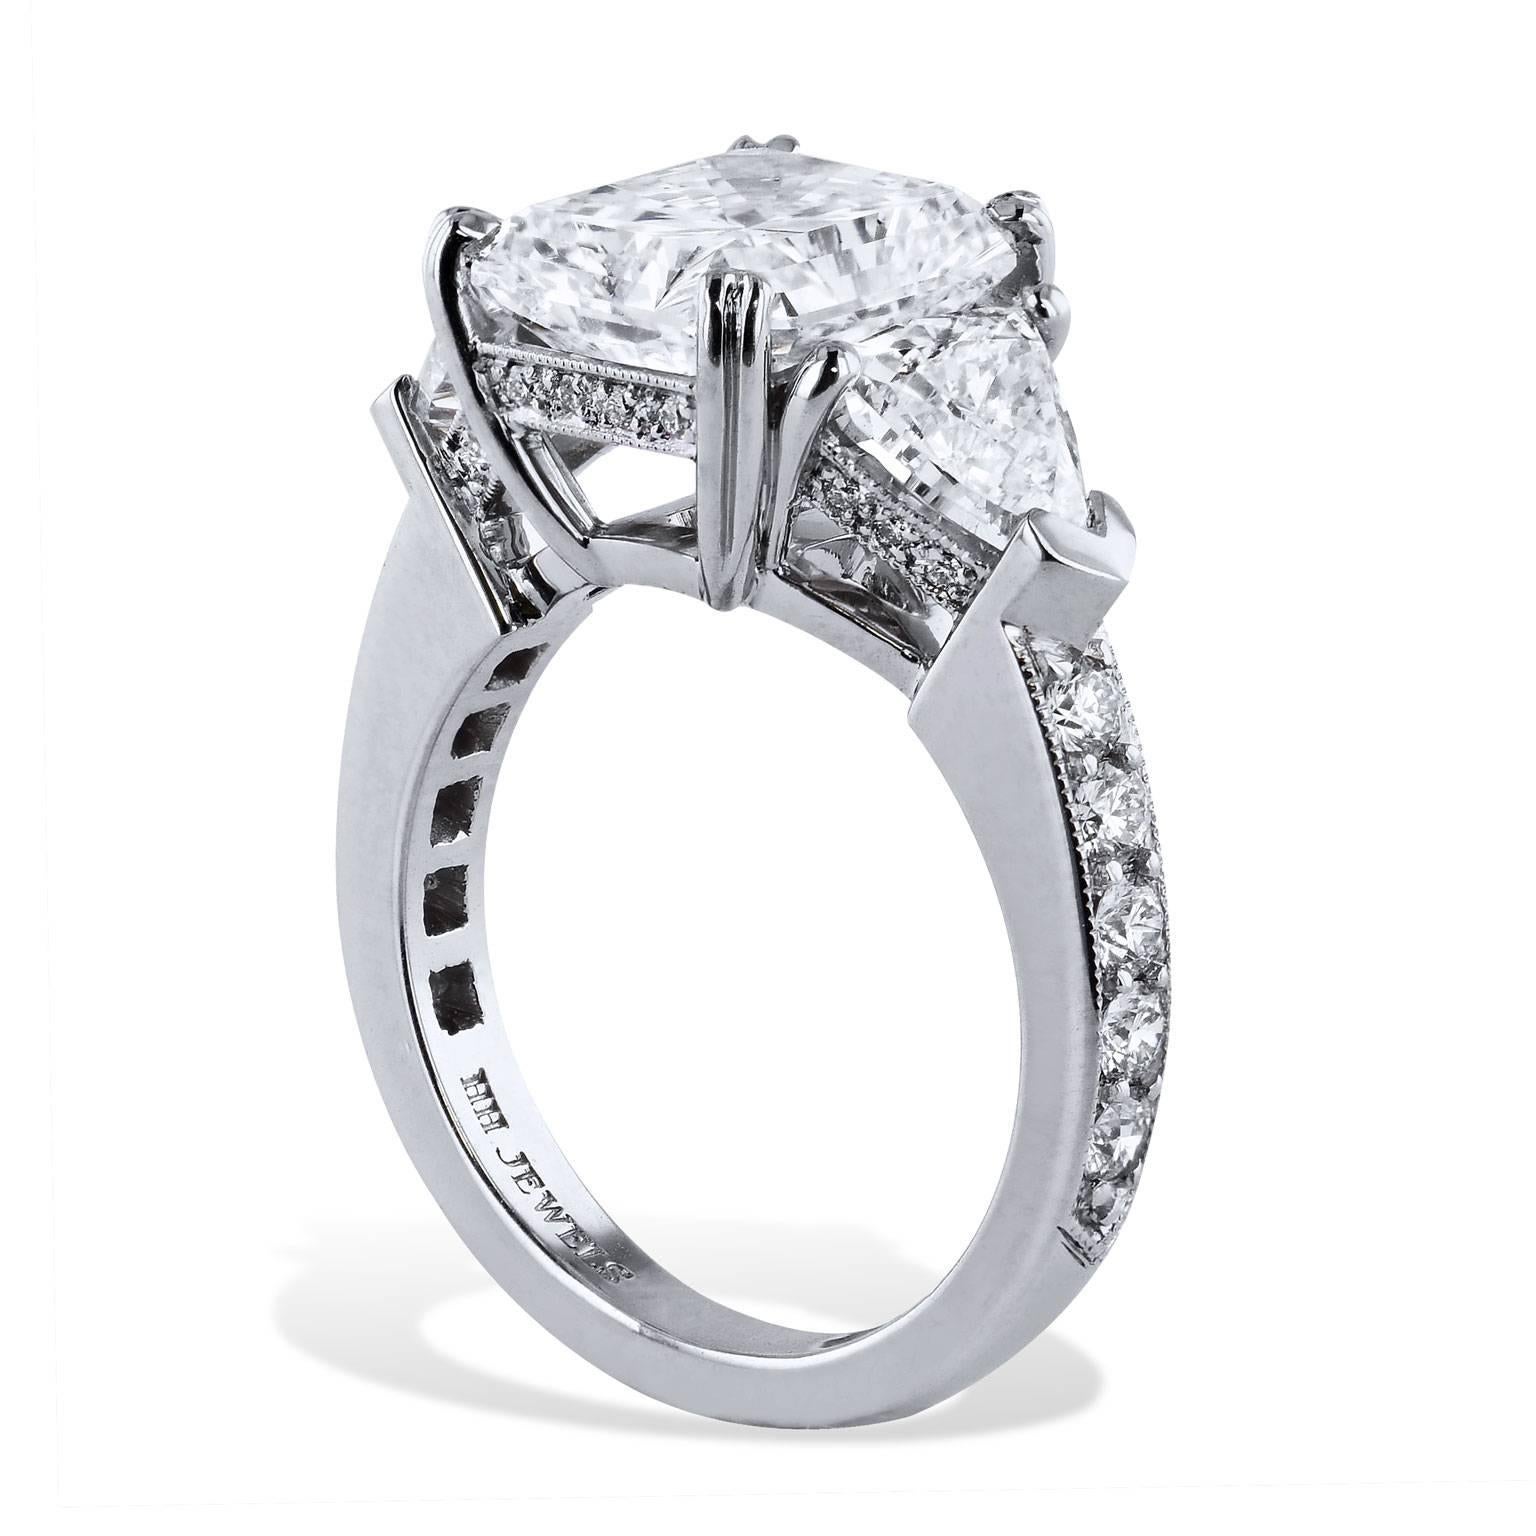 An engagement ring that will warm her heart and leave her speechless. Handmade by H, this ring features a bold 4.33 carat cut-cornered rectangular mixed cut diamond set at center and is fashioned in platinum (G/SI1; GIA #13810927). Two pieces of